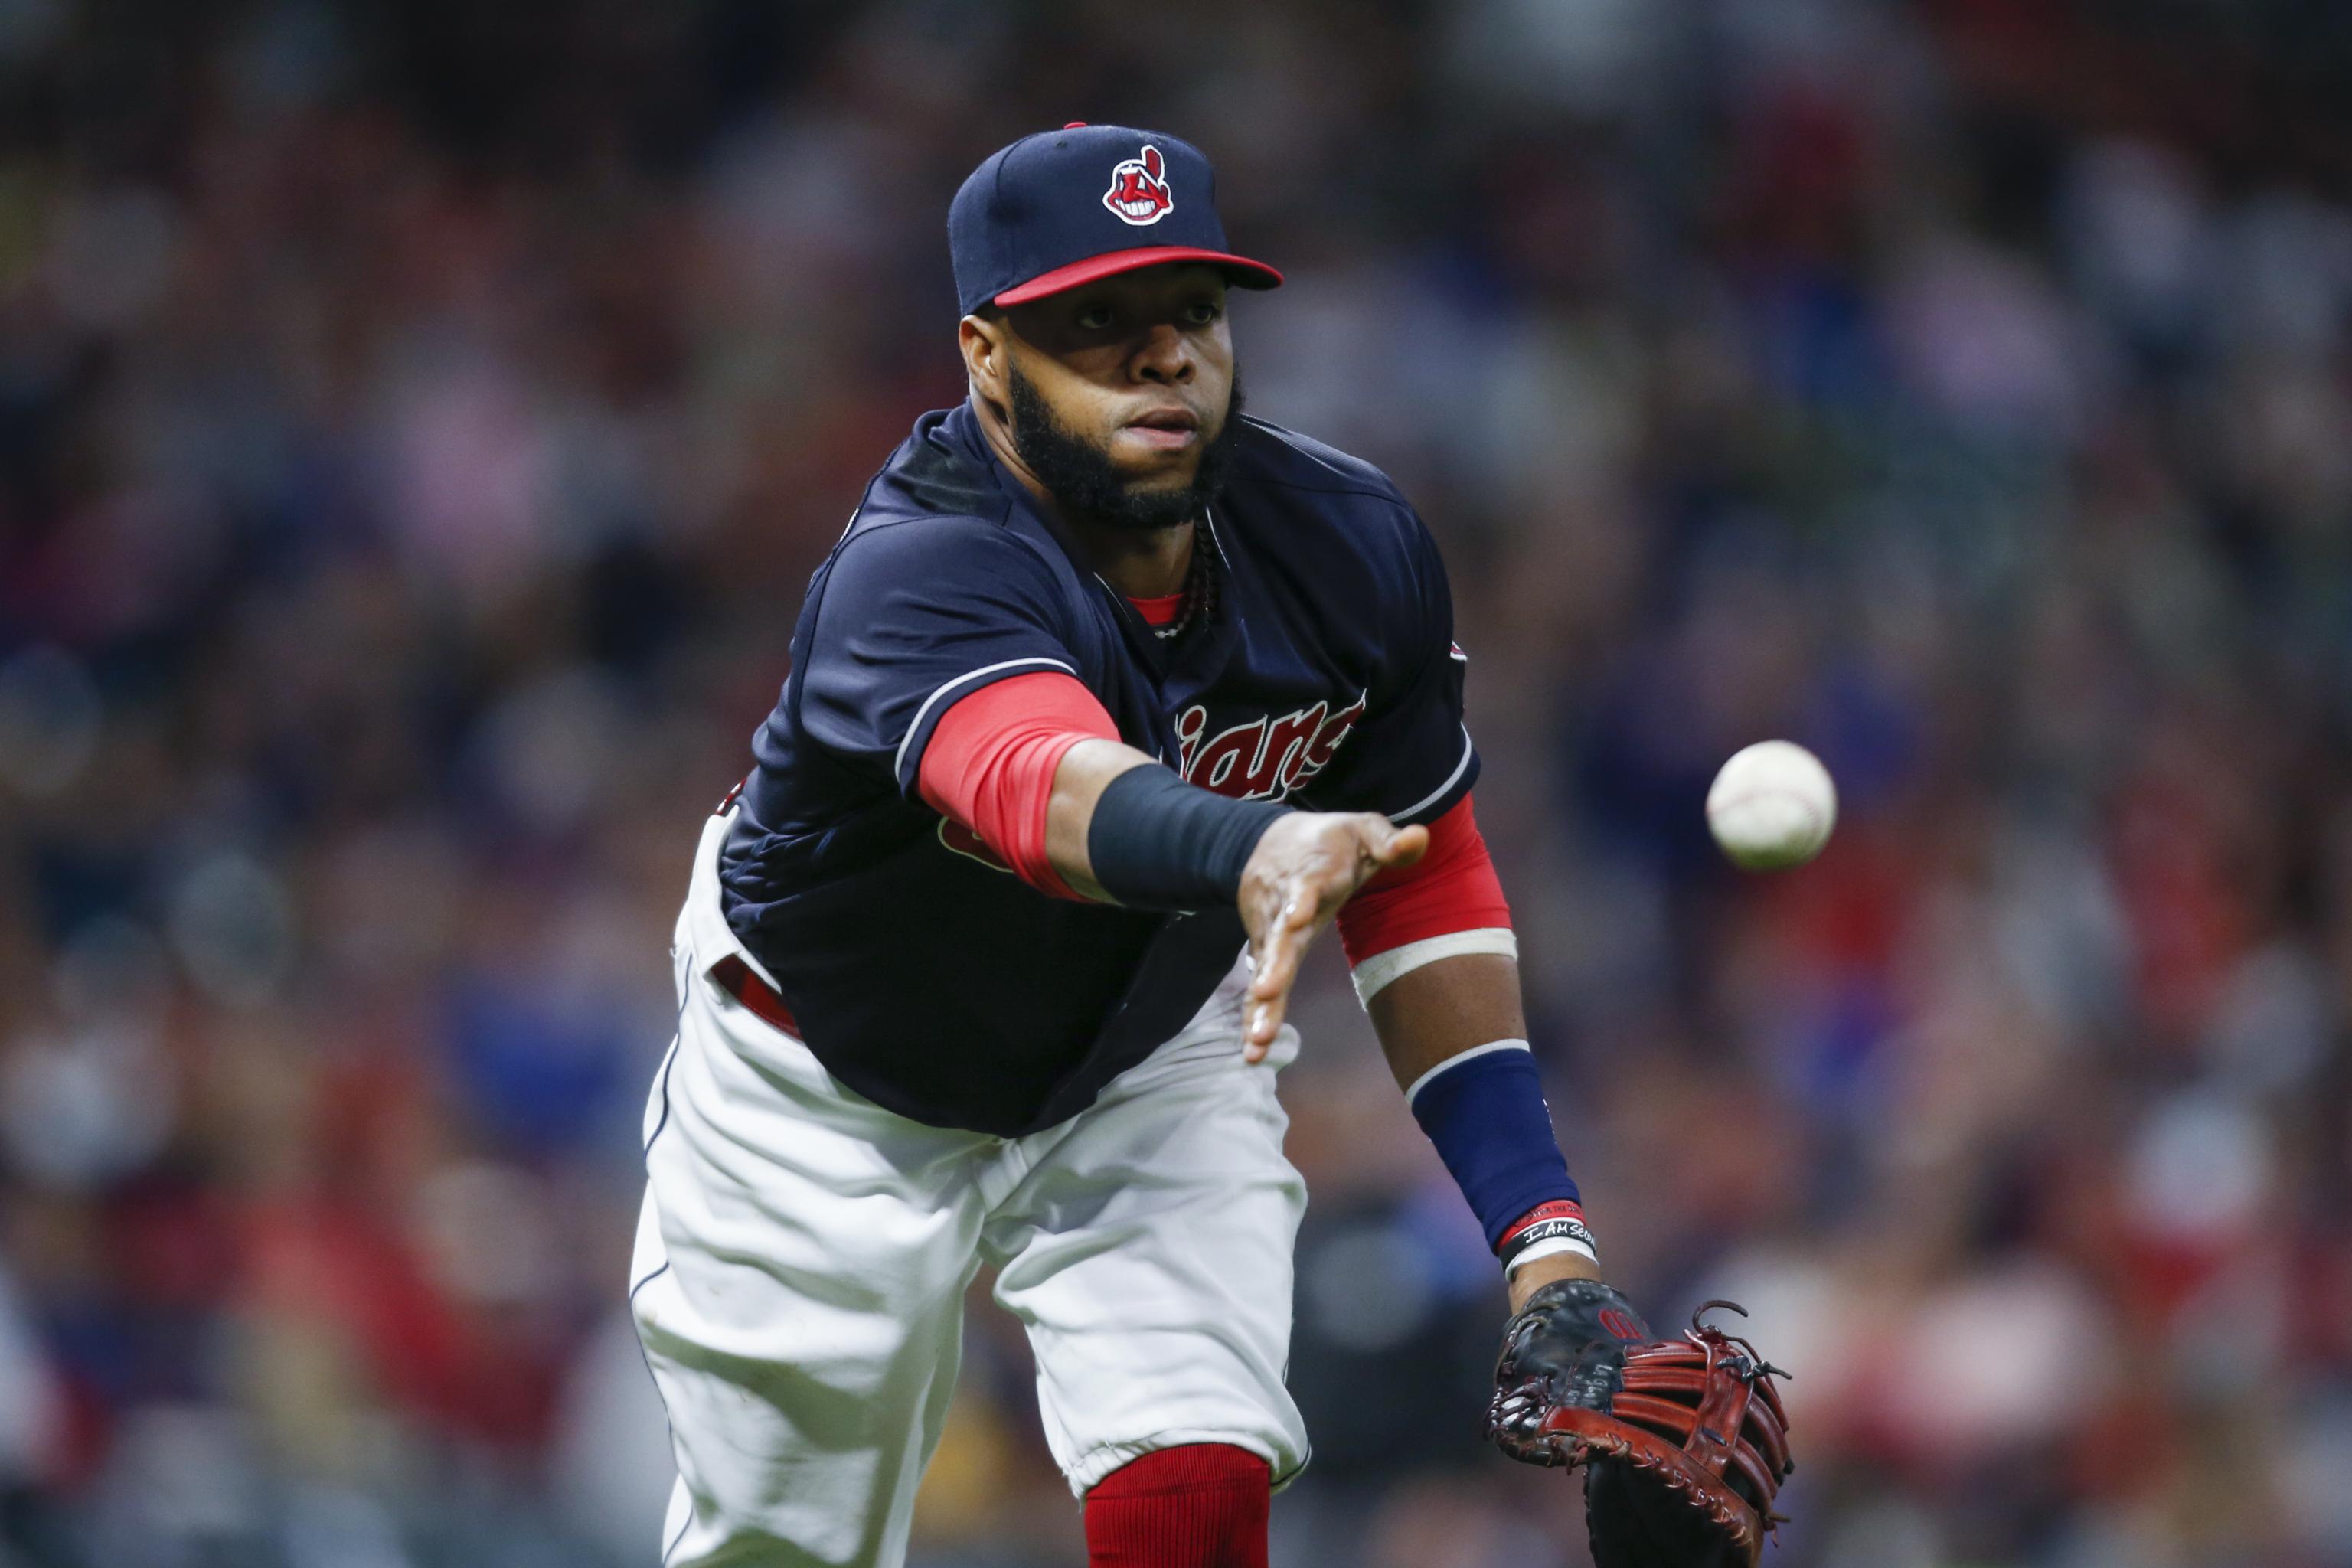 Phillies sign Carlos Santana to 3-year, $60 million contract